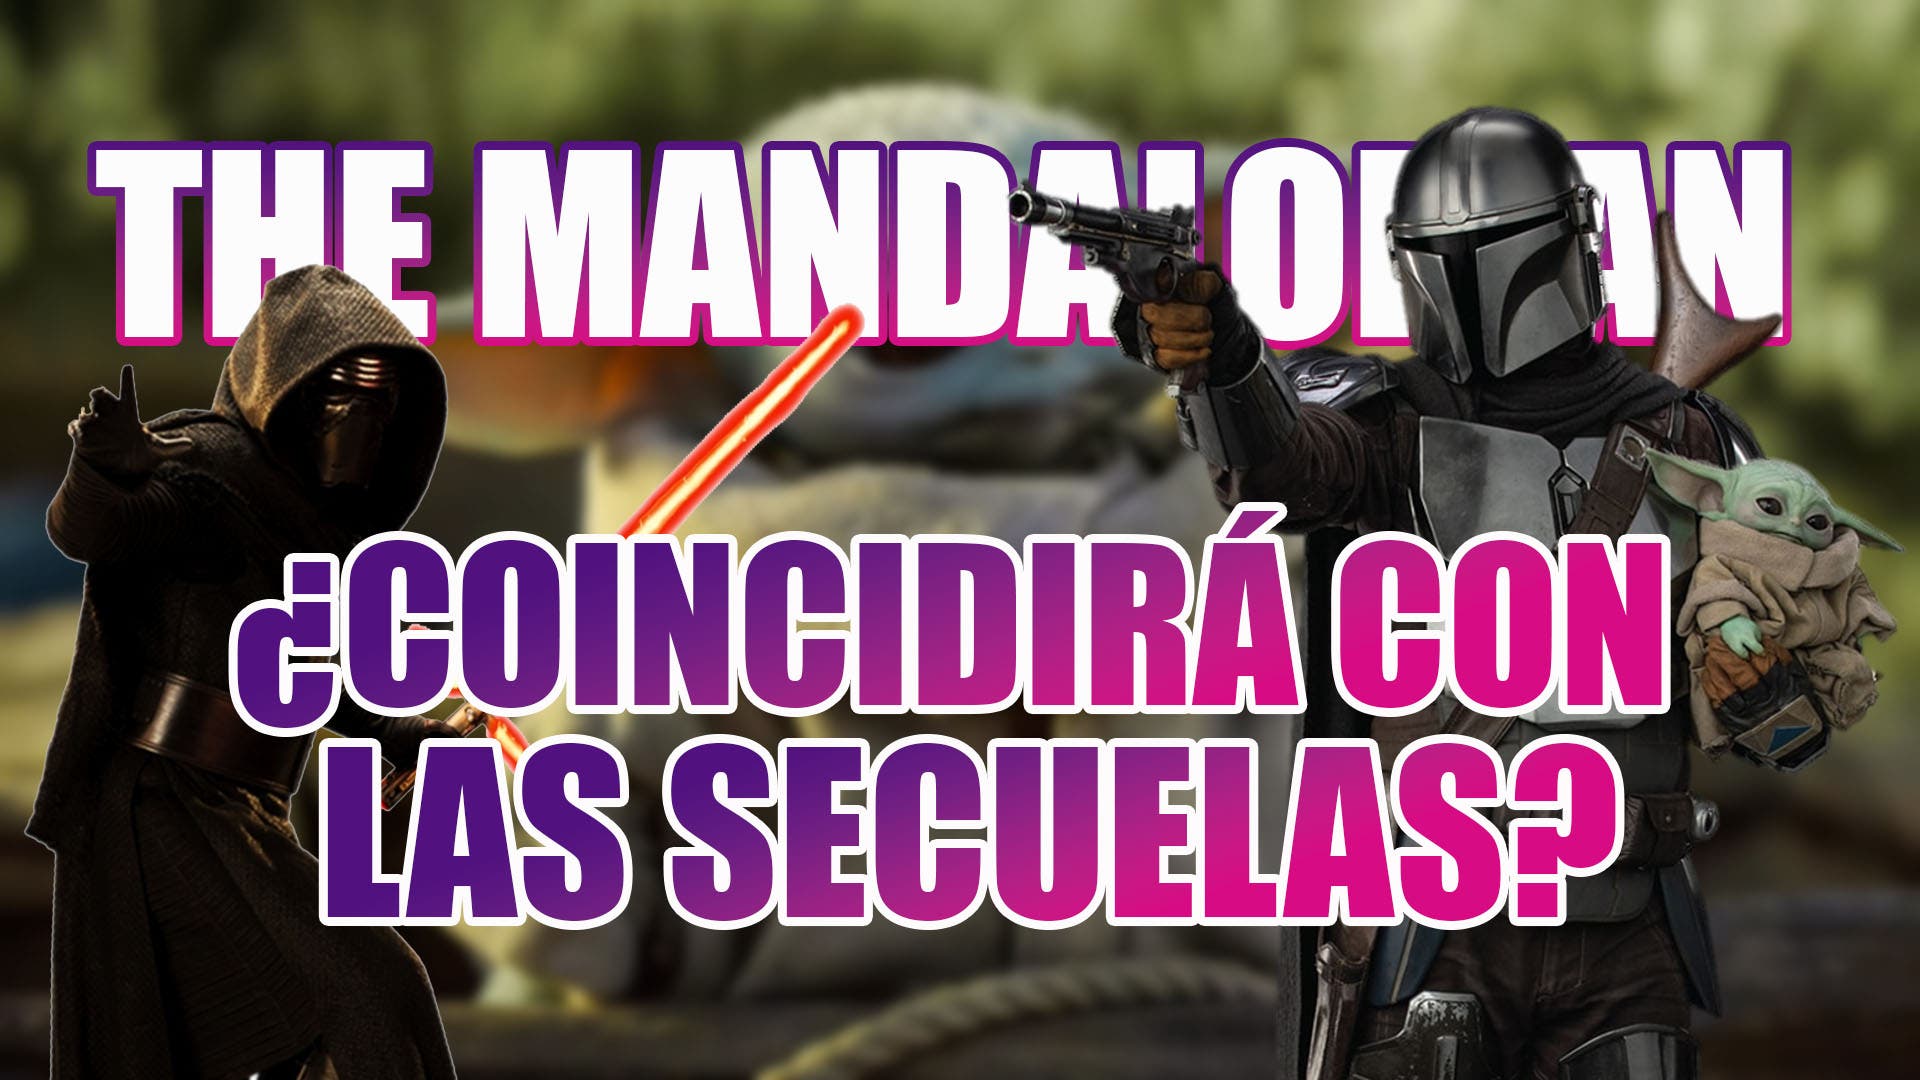 Will The Mandalorian coincide with the Star Wars sequels?